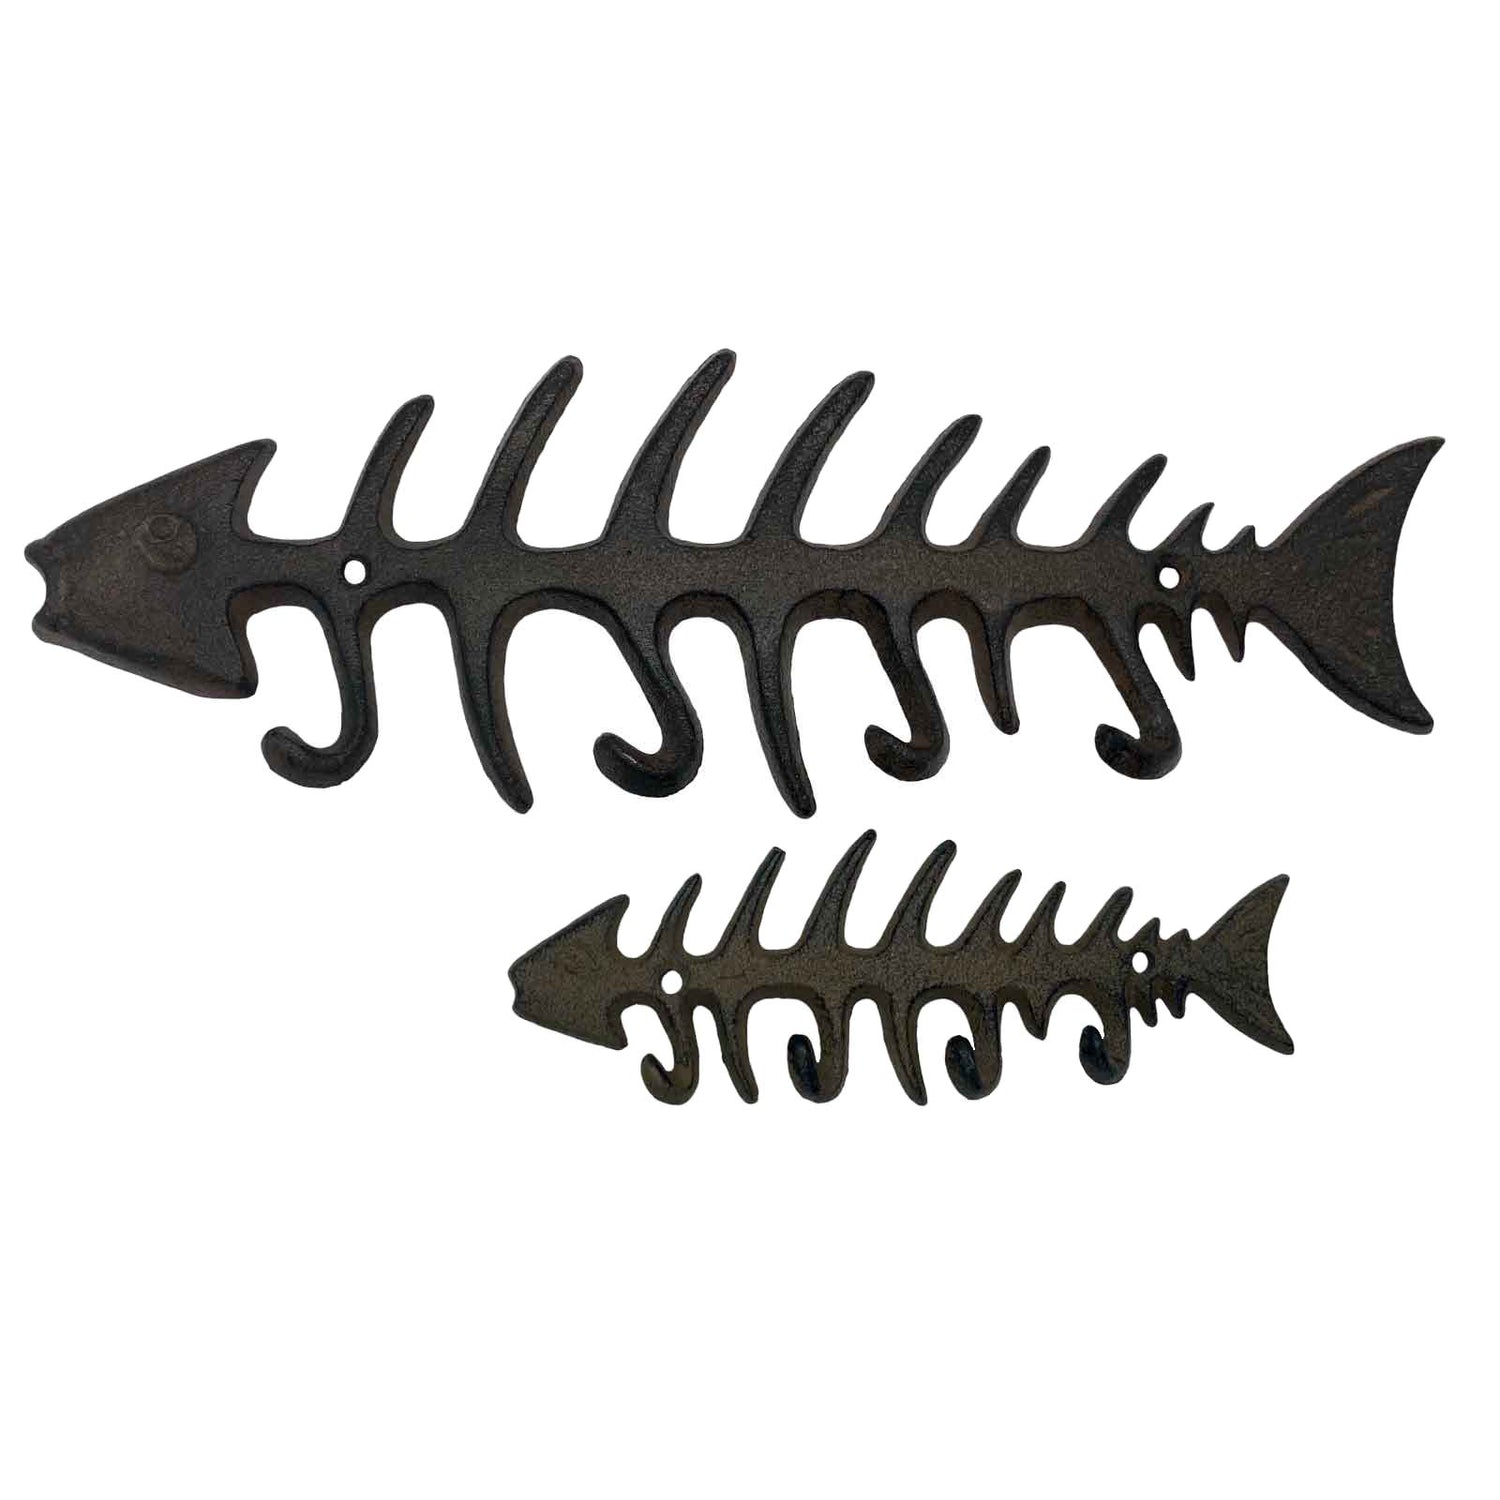 Fishbone Wall Hooks - 2 sizes available Large and Small